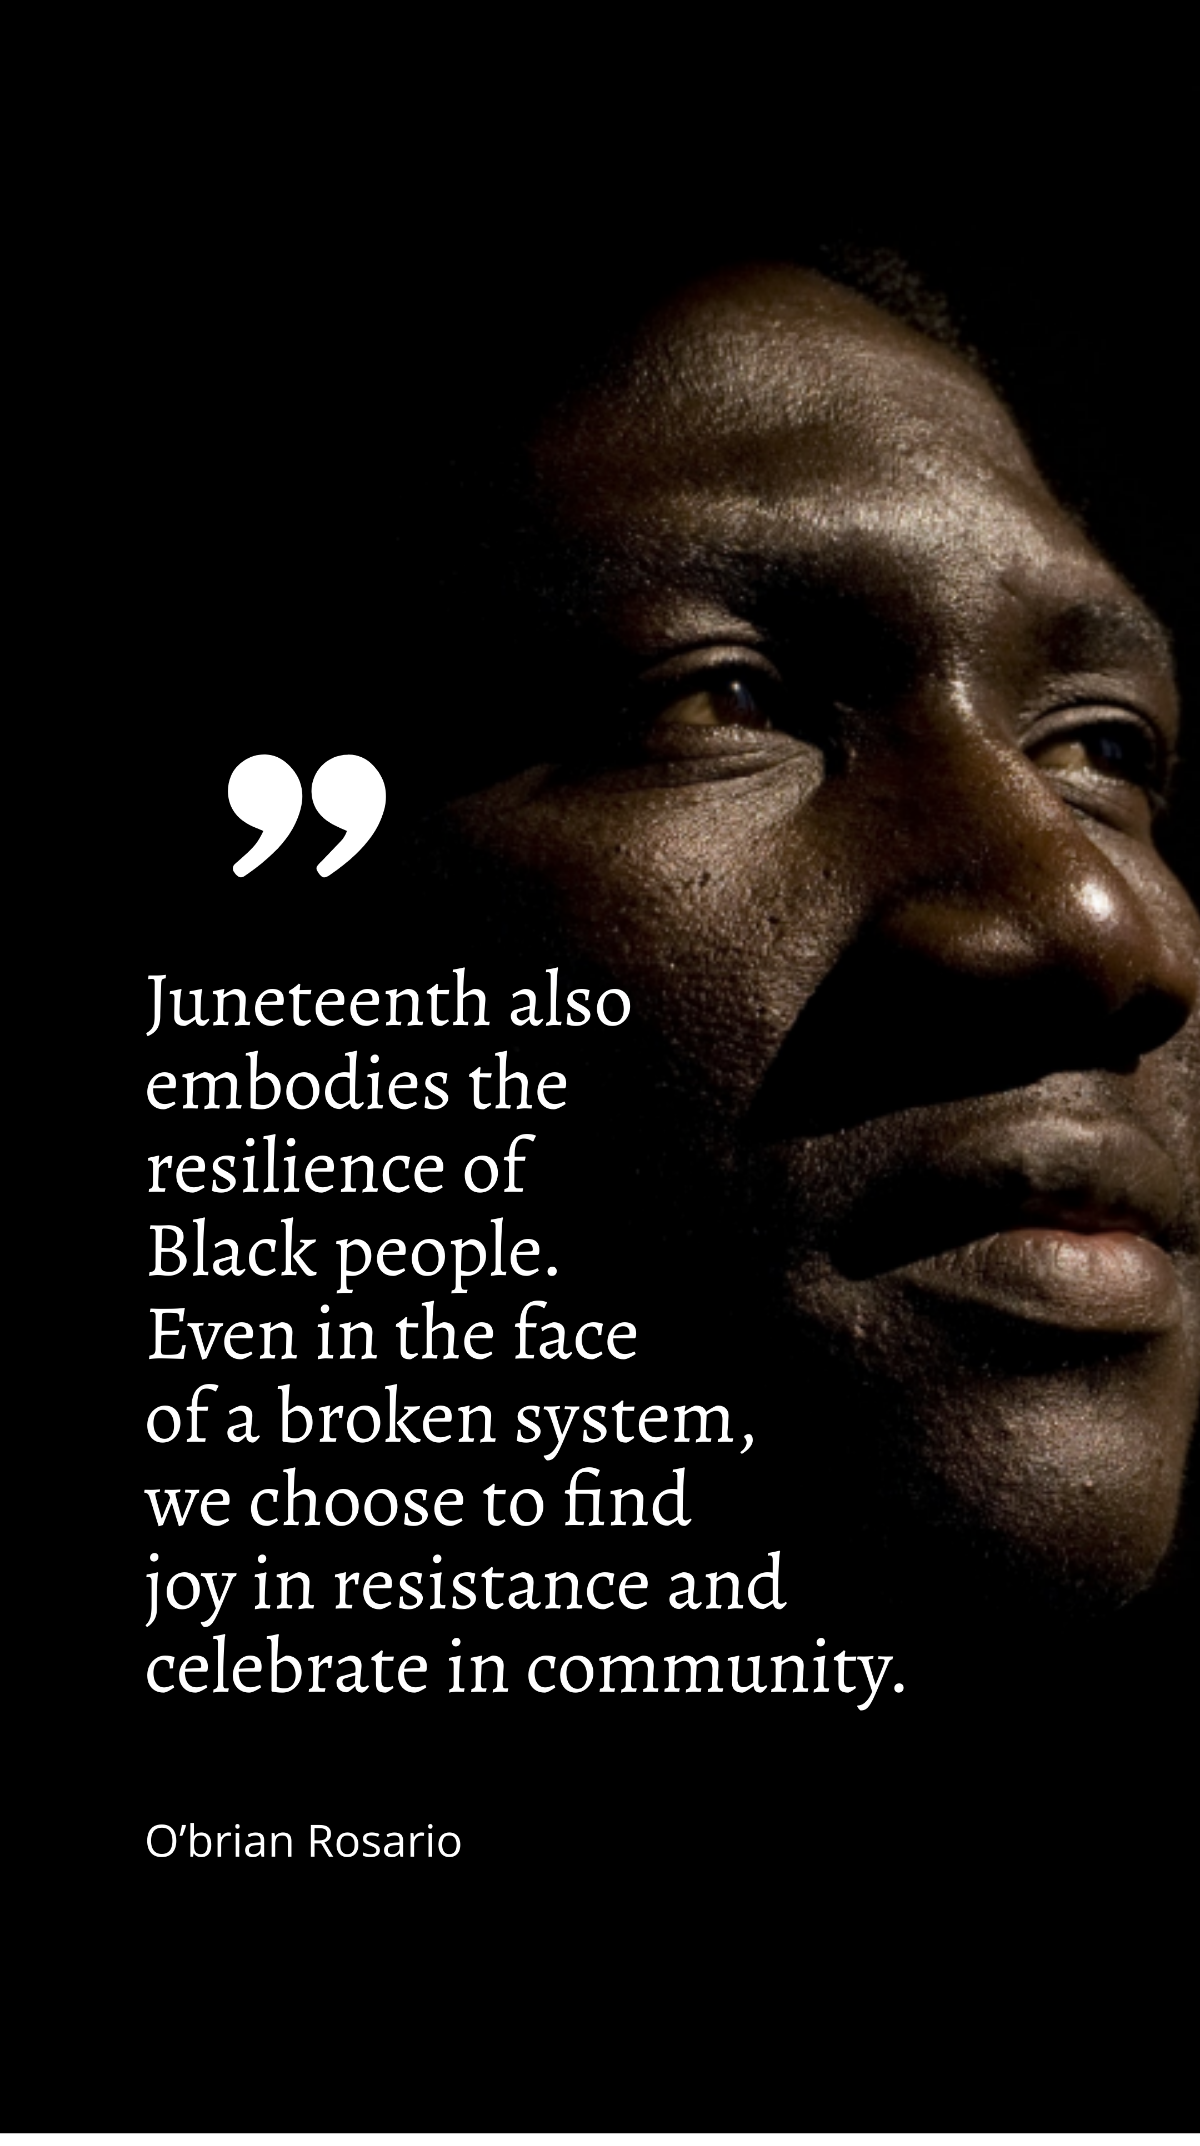 O’brian Rosario - Juneteenth also embodies the resilience of Black people. Even in the face of a broken system, we choose to find joy in resistance and celebrate in community. Template